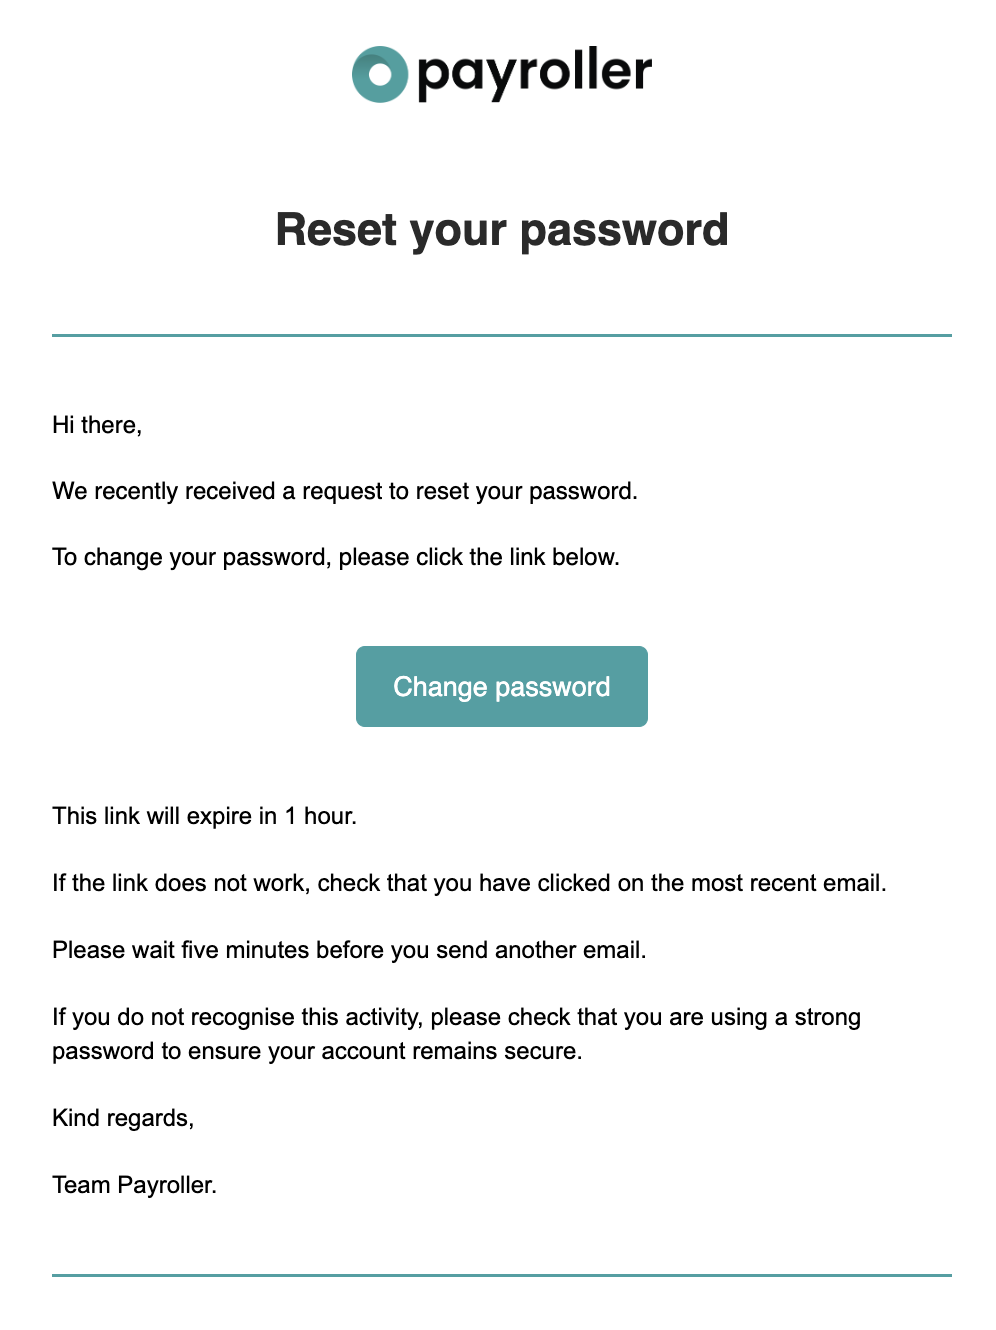 Accessing your account - Resetting your password - 4